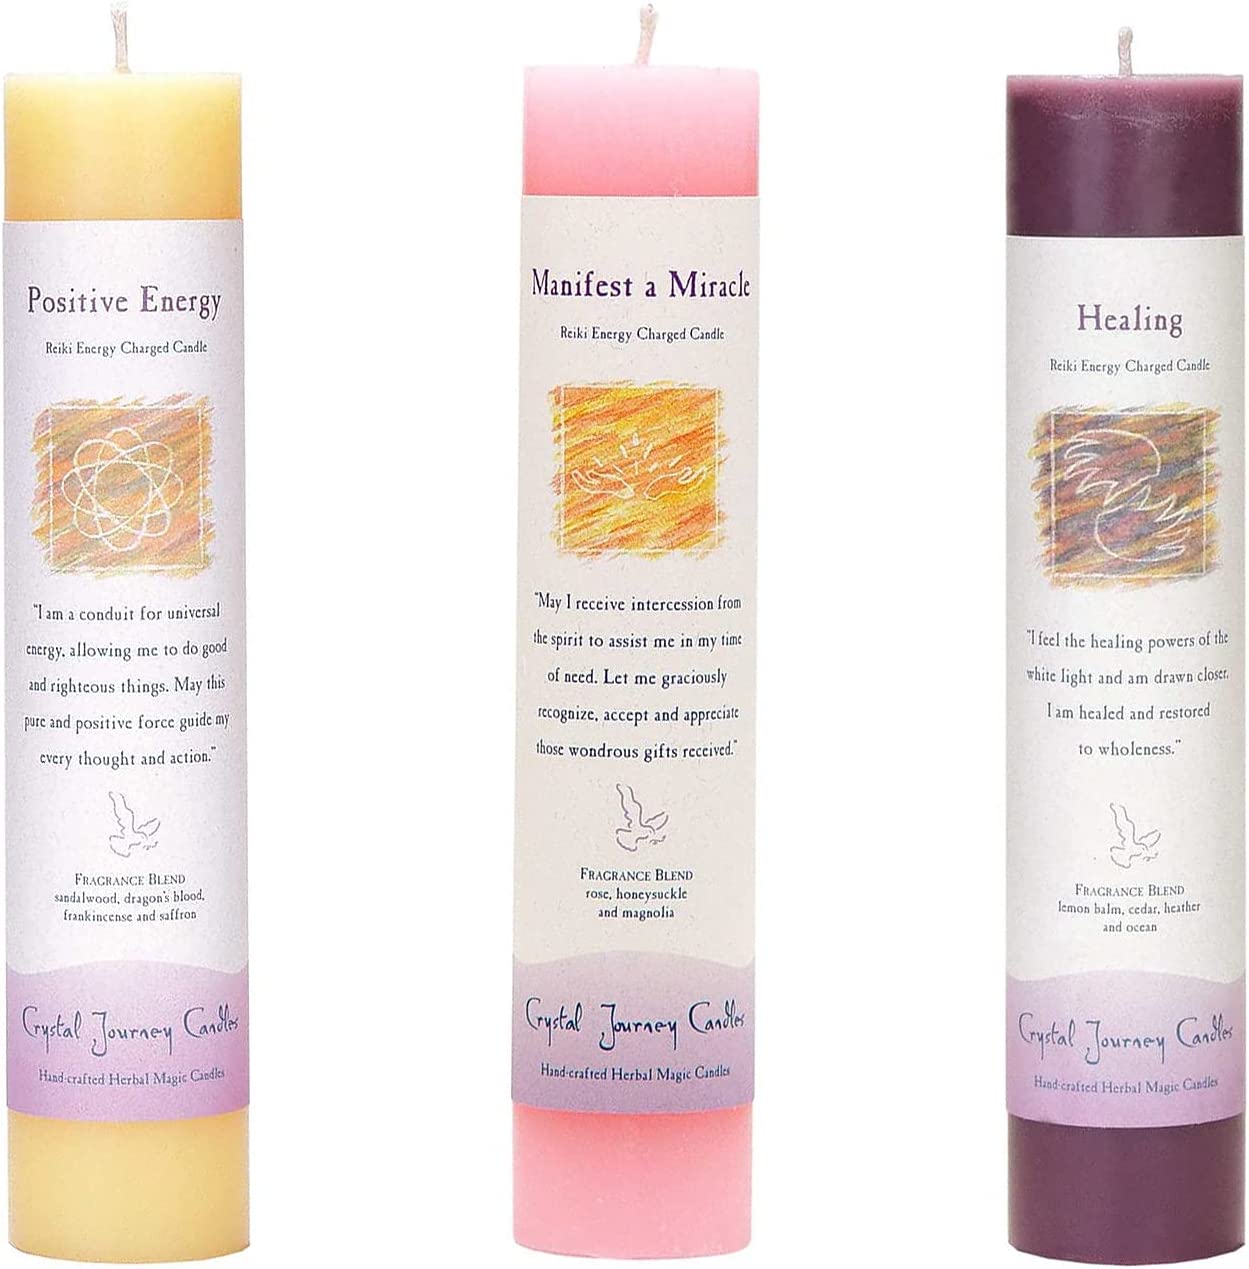 Herbal Magic Reiki Charged Candles